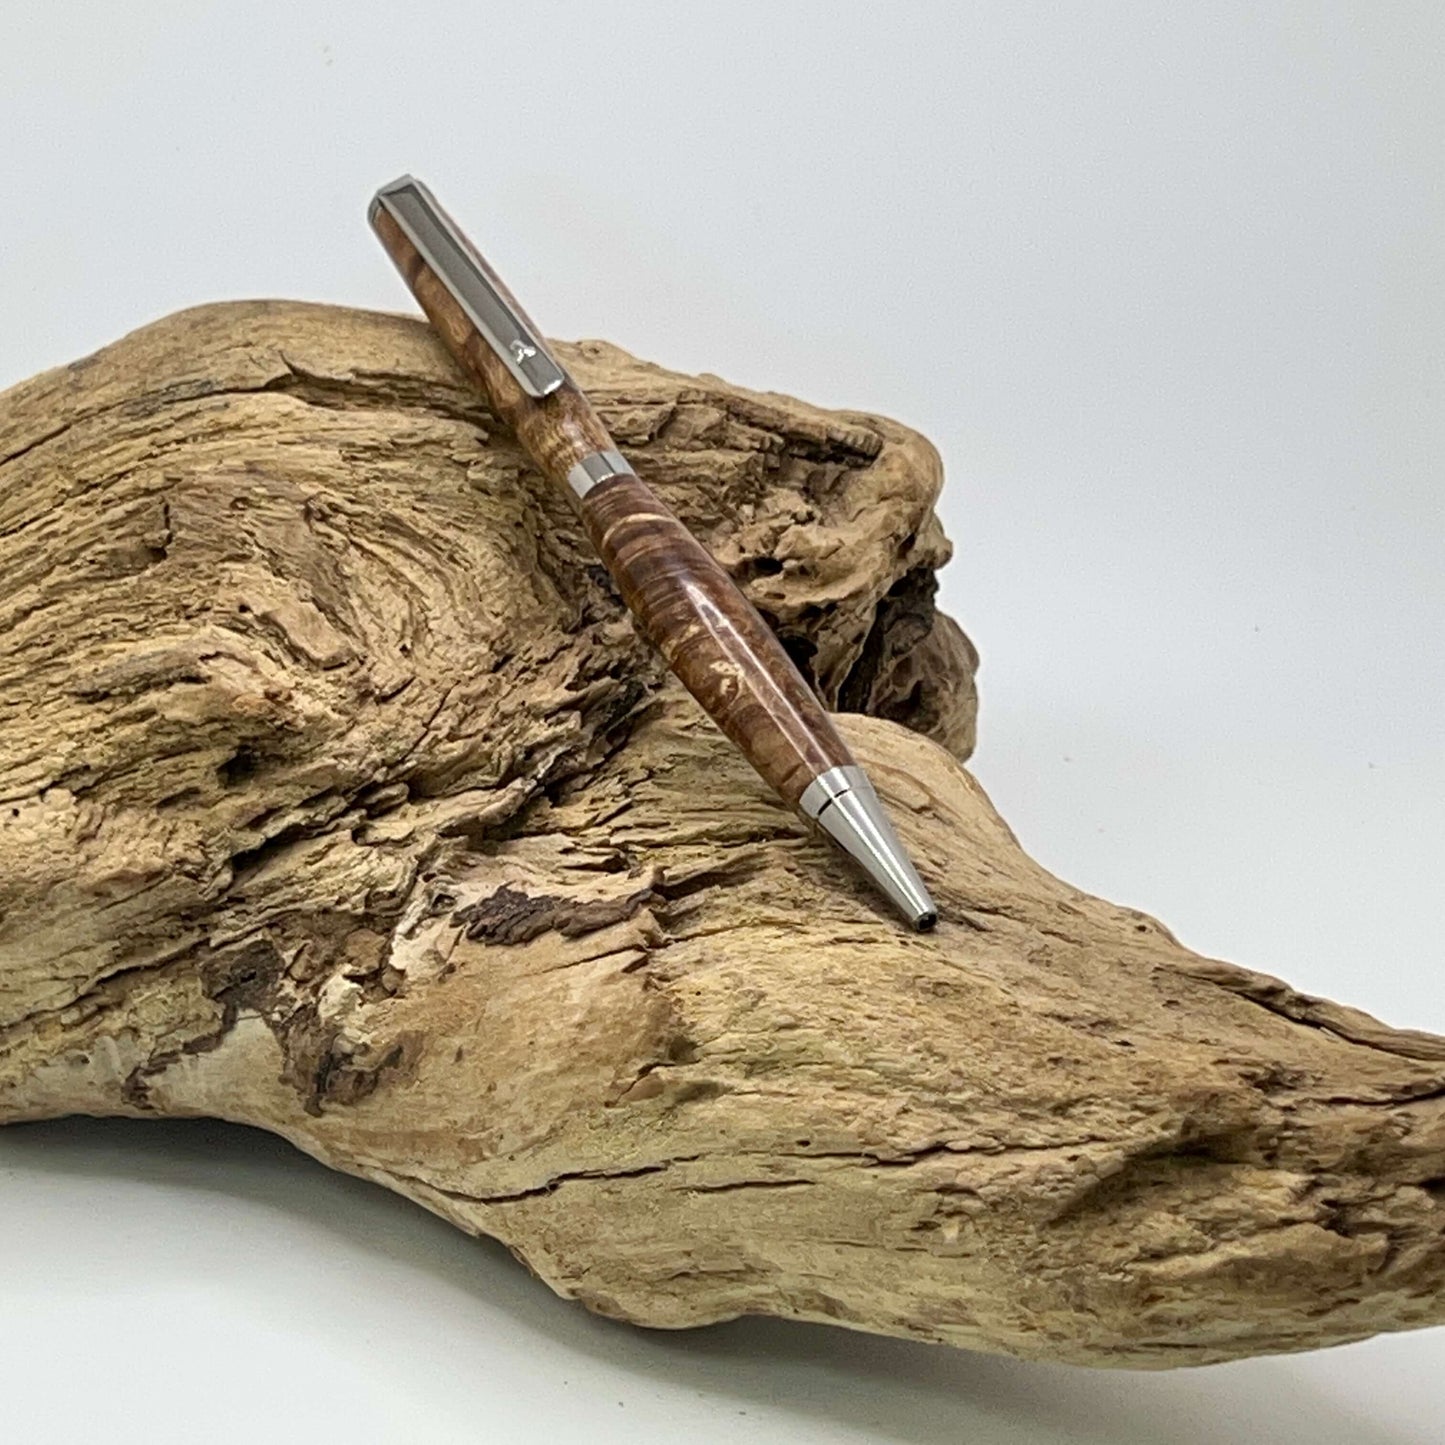 Handcrafted Box elder wood pen dyed brown setting on driftwood